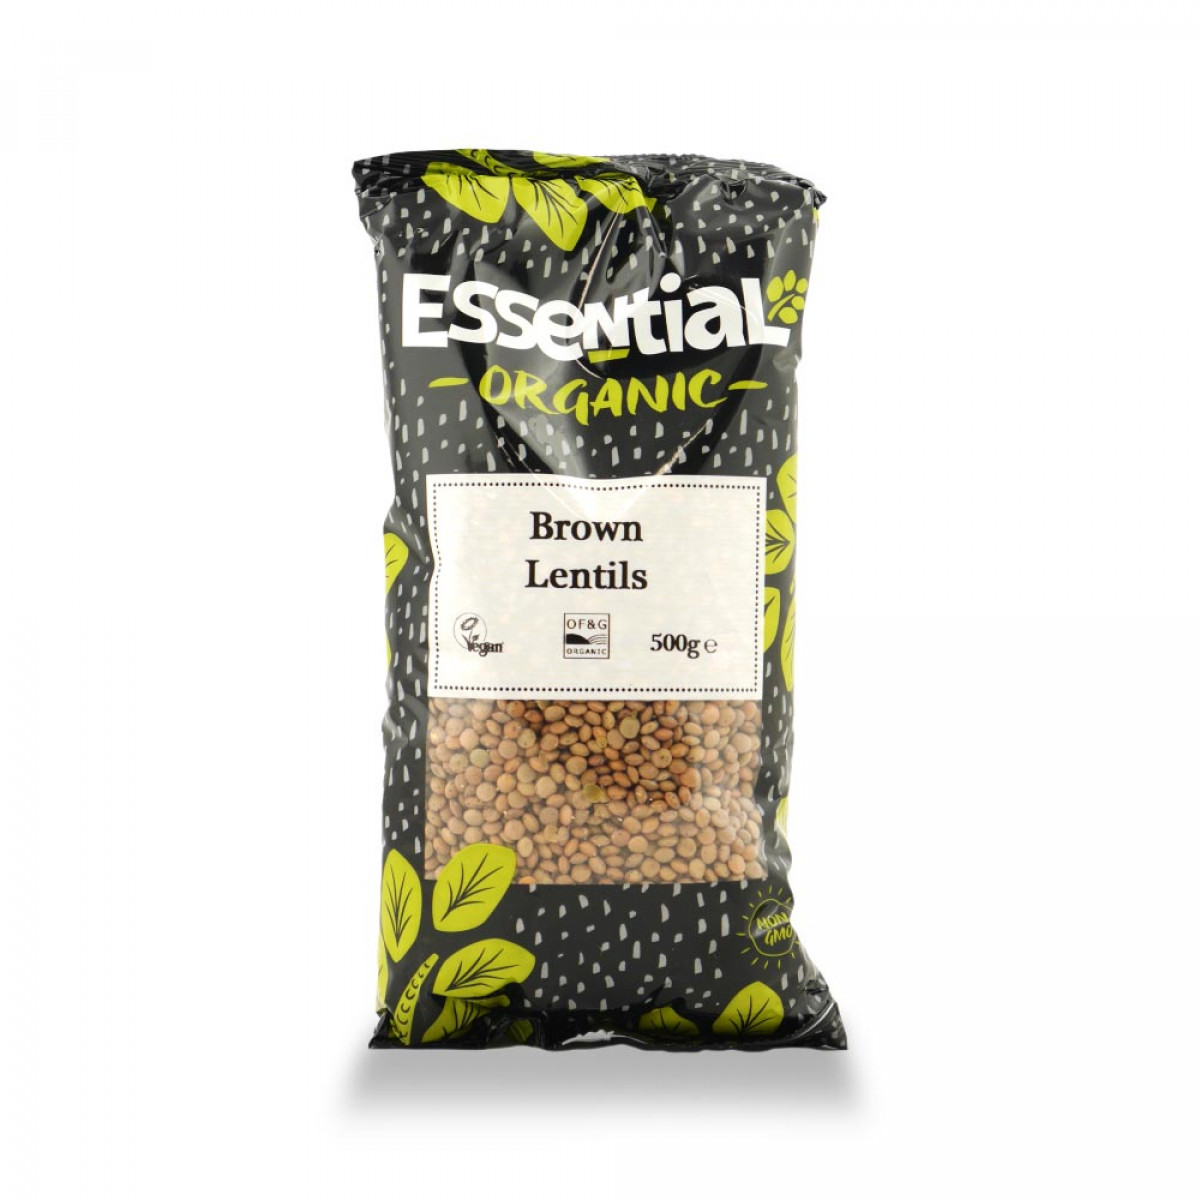 Product picture for Brown Lentils